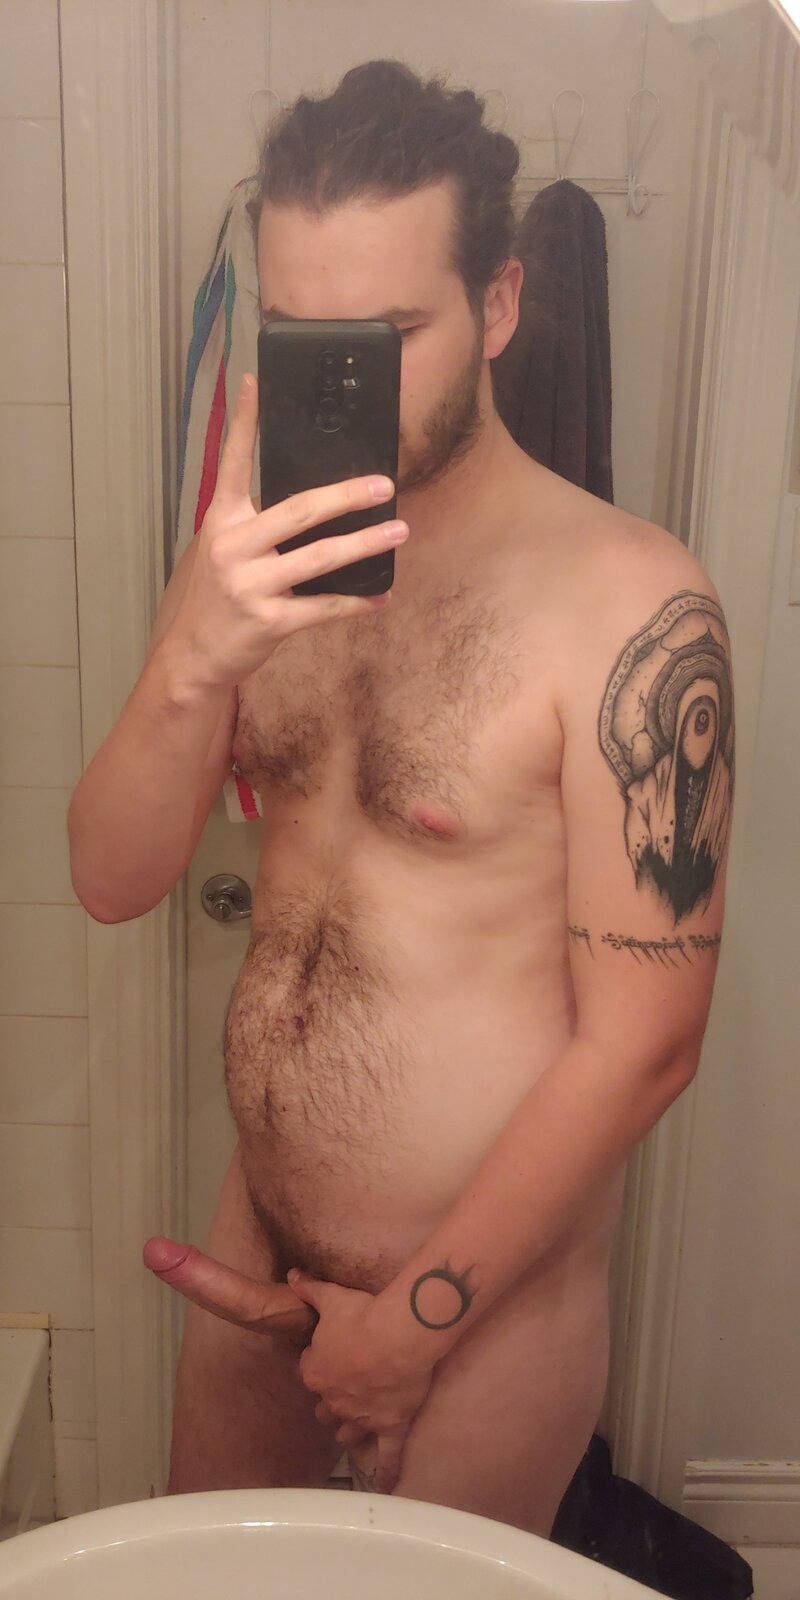 This cock is all yours, just ask for it in the comments or tribute me like the horny fucker you are picture